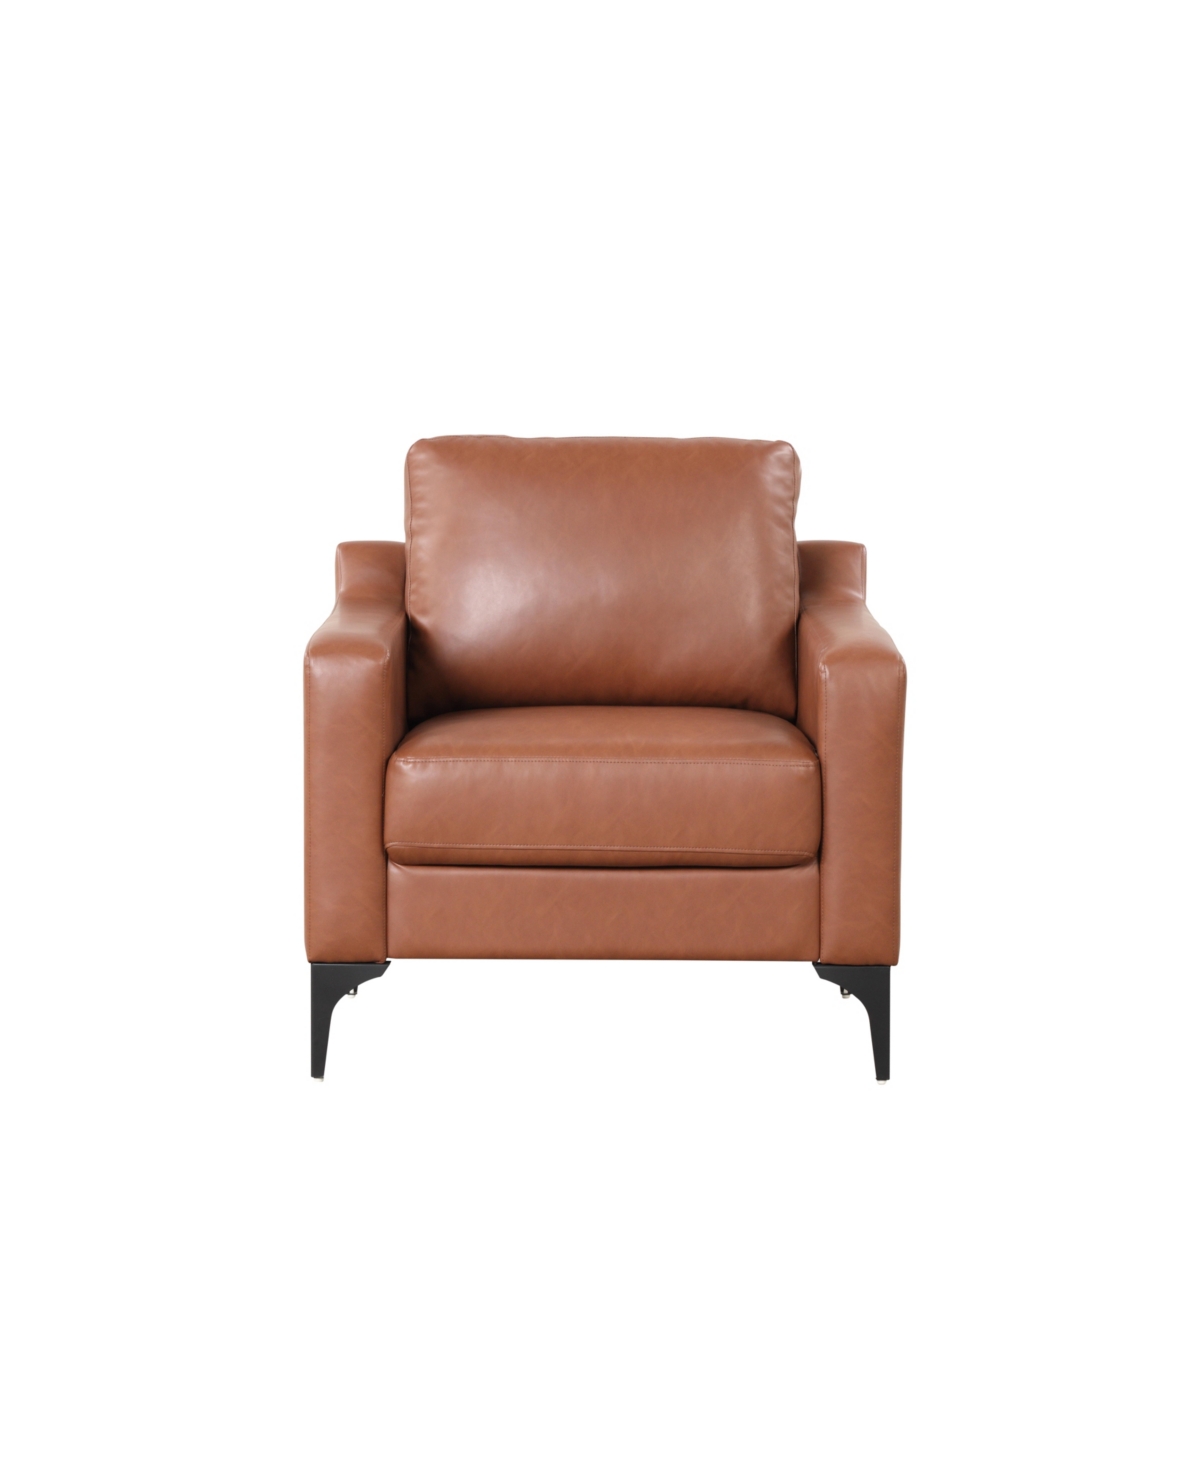 Serta 34.3" W Faux Leather Sturdy Francis Chair In Brown